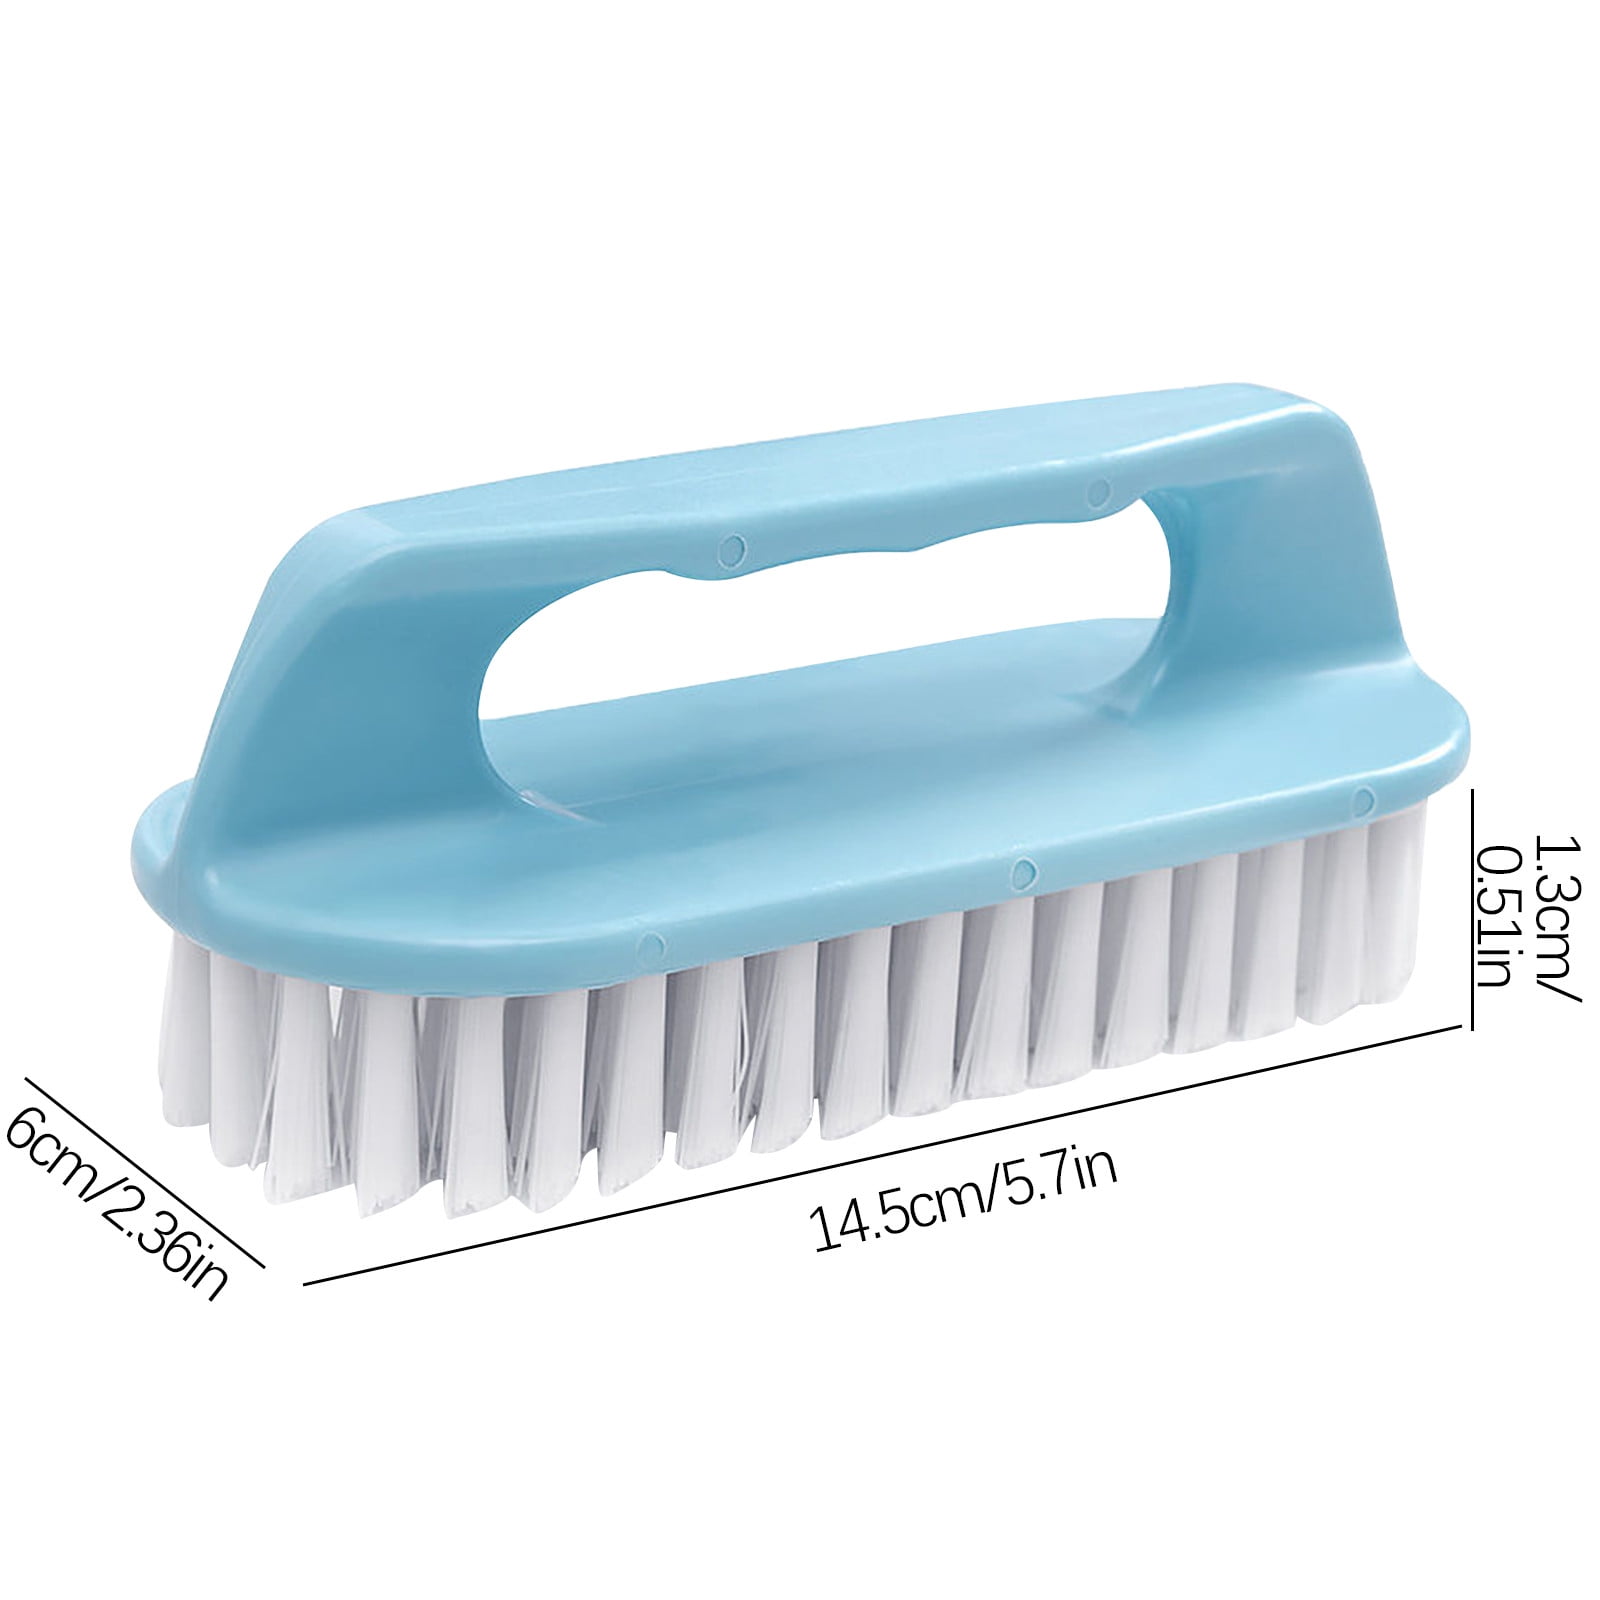  Arinda Rolling Washing Machine Cleaning Brush Cleaning Brushes  for Home Durable Nylon : Health & Household